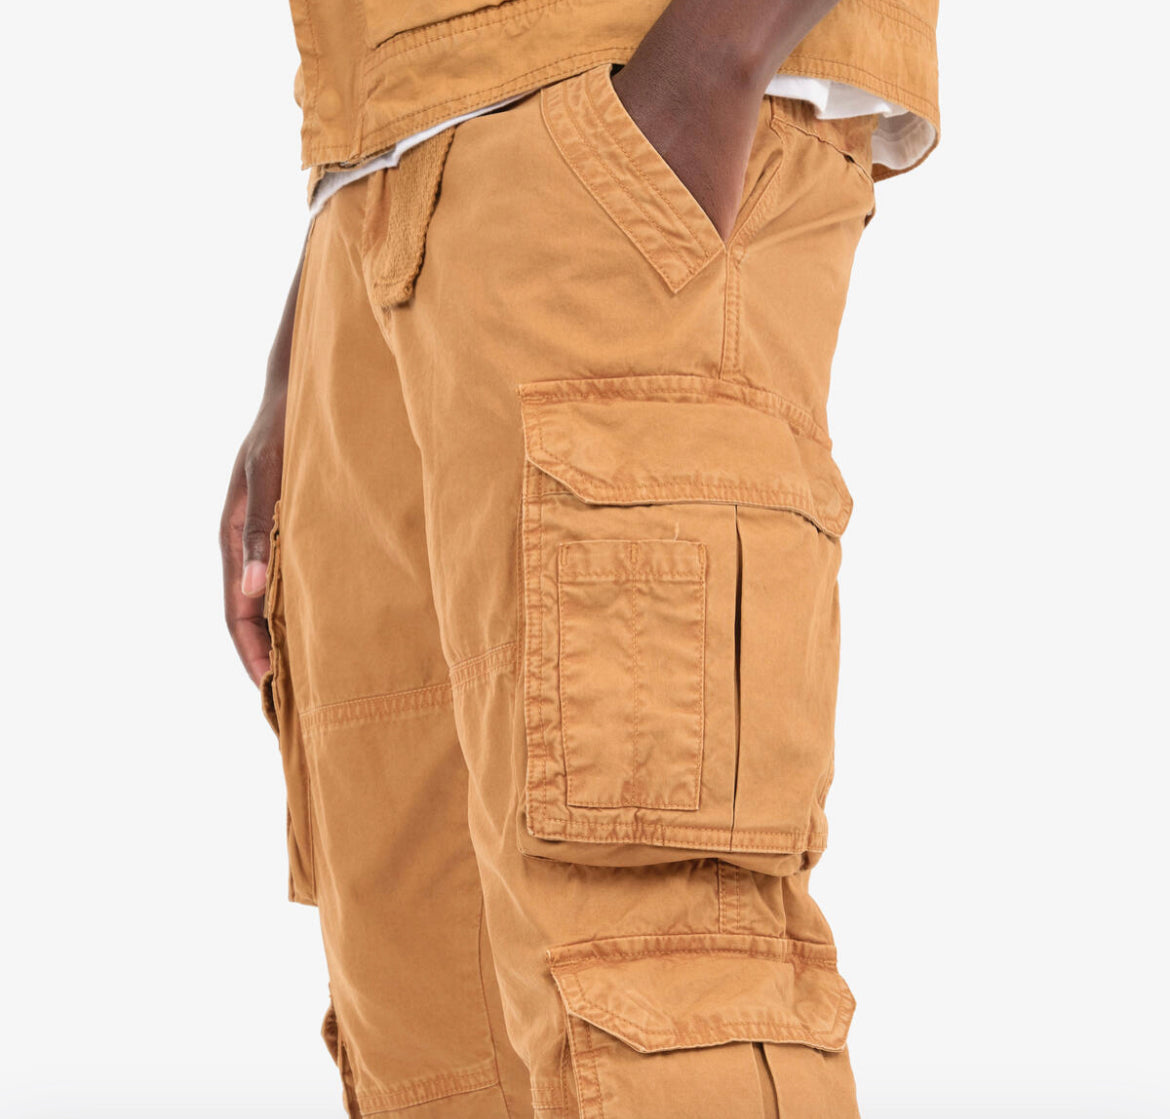 COPPER RIVET TIMBER BROWN CARGO PANTS .– Bold Outfitters